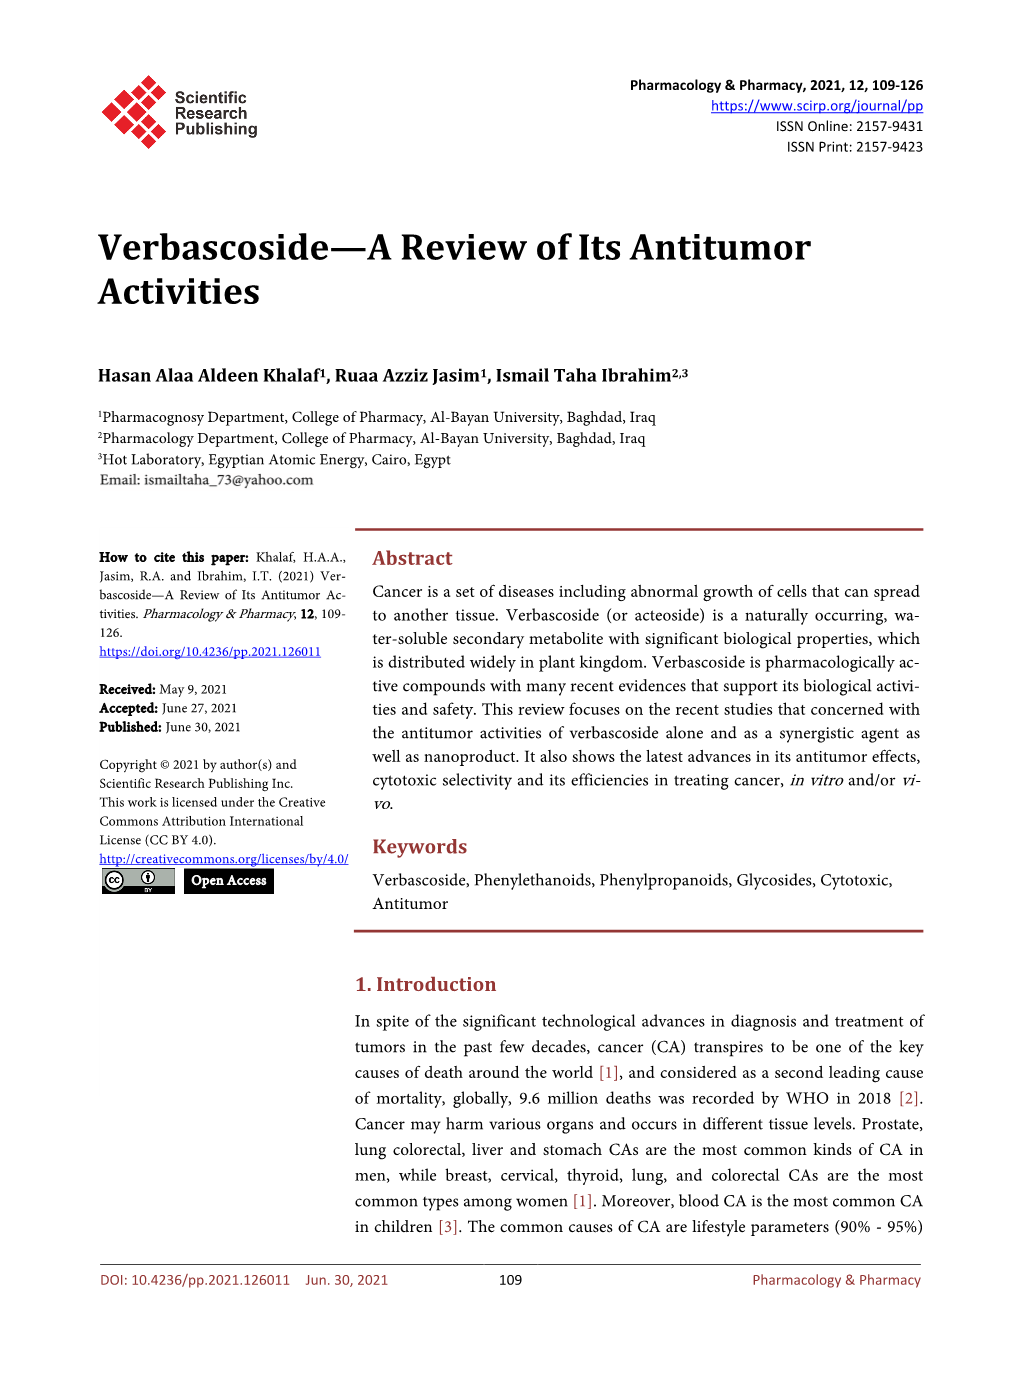 Verbascoside—A Review of Its Antitumor Activities